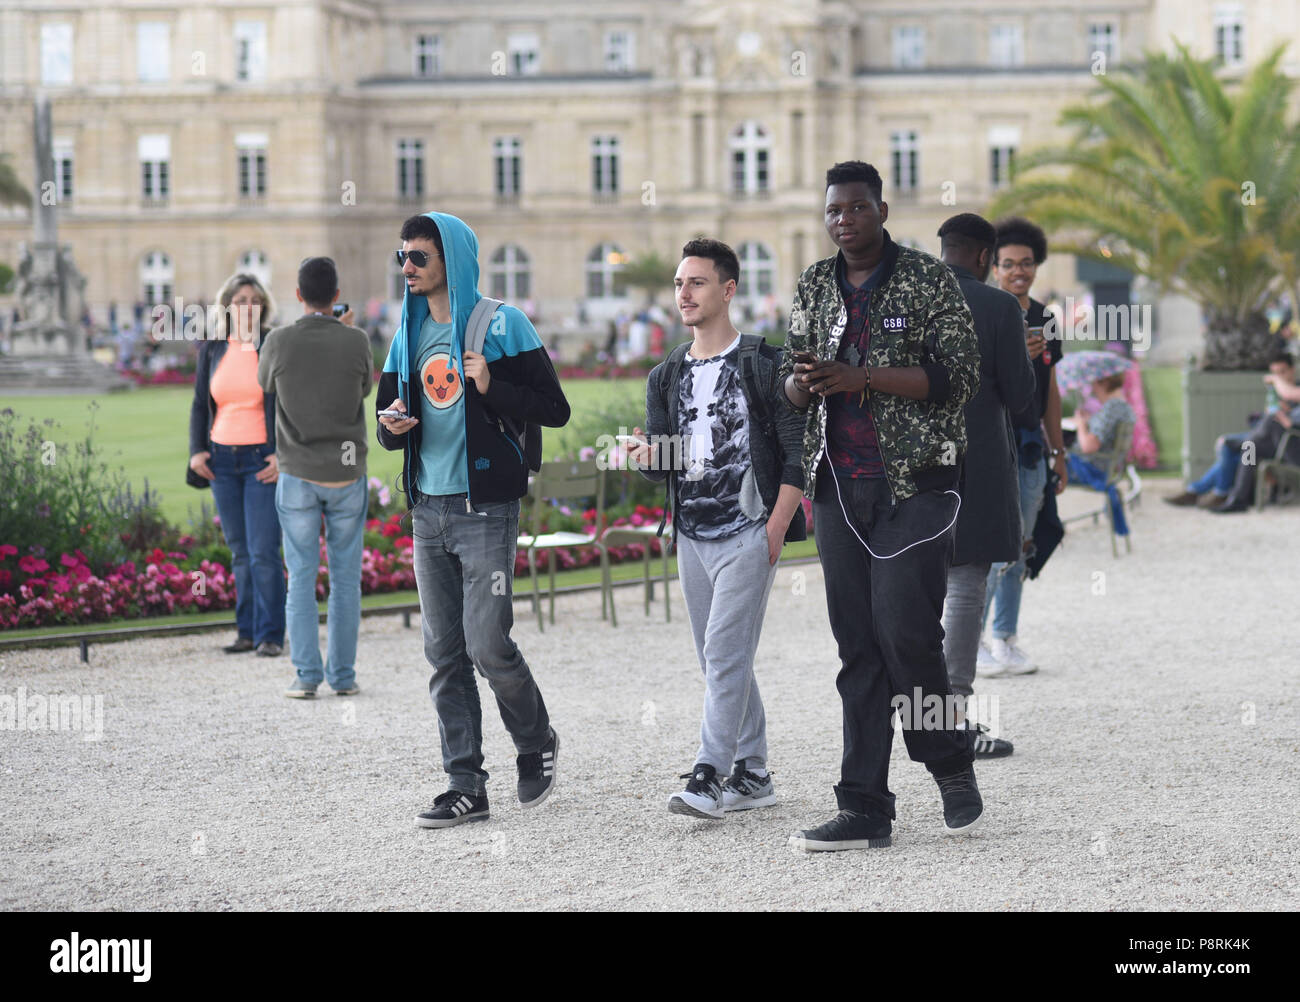 July 14, 2016 - Paris, France: Youths take part in a mass Pokemon hunt in the Luxembourg Garden in central Paris. Hundreds of players of the new Pokemon Go game showed up to take part in a massive hunt despite the authorities' attempt to cancel the event. Despite playing mostly solo, the Pokemon Go users enjoyed to interact and meet other players. Millions of users have already downloaded the game, which requires users to catch on-screen pokemon characters using their real-world location. Des jeunes participent a une chasse au Pokemons dans le jardin du Luxembourg avec l'application Pokemon Go Stock Photo